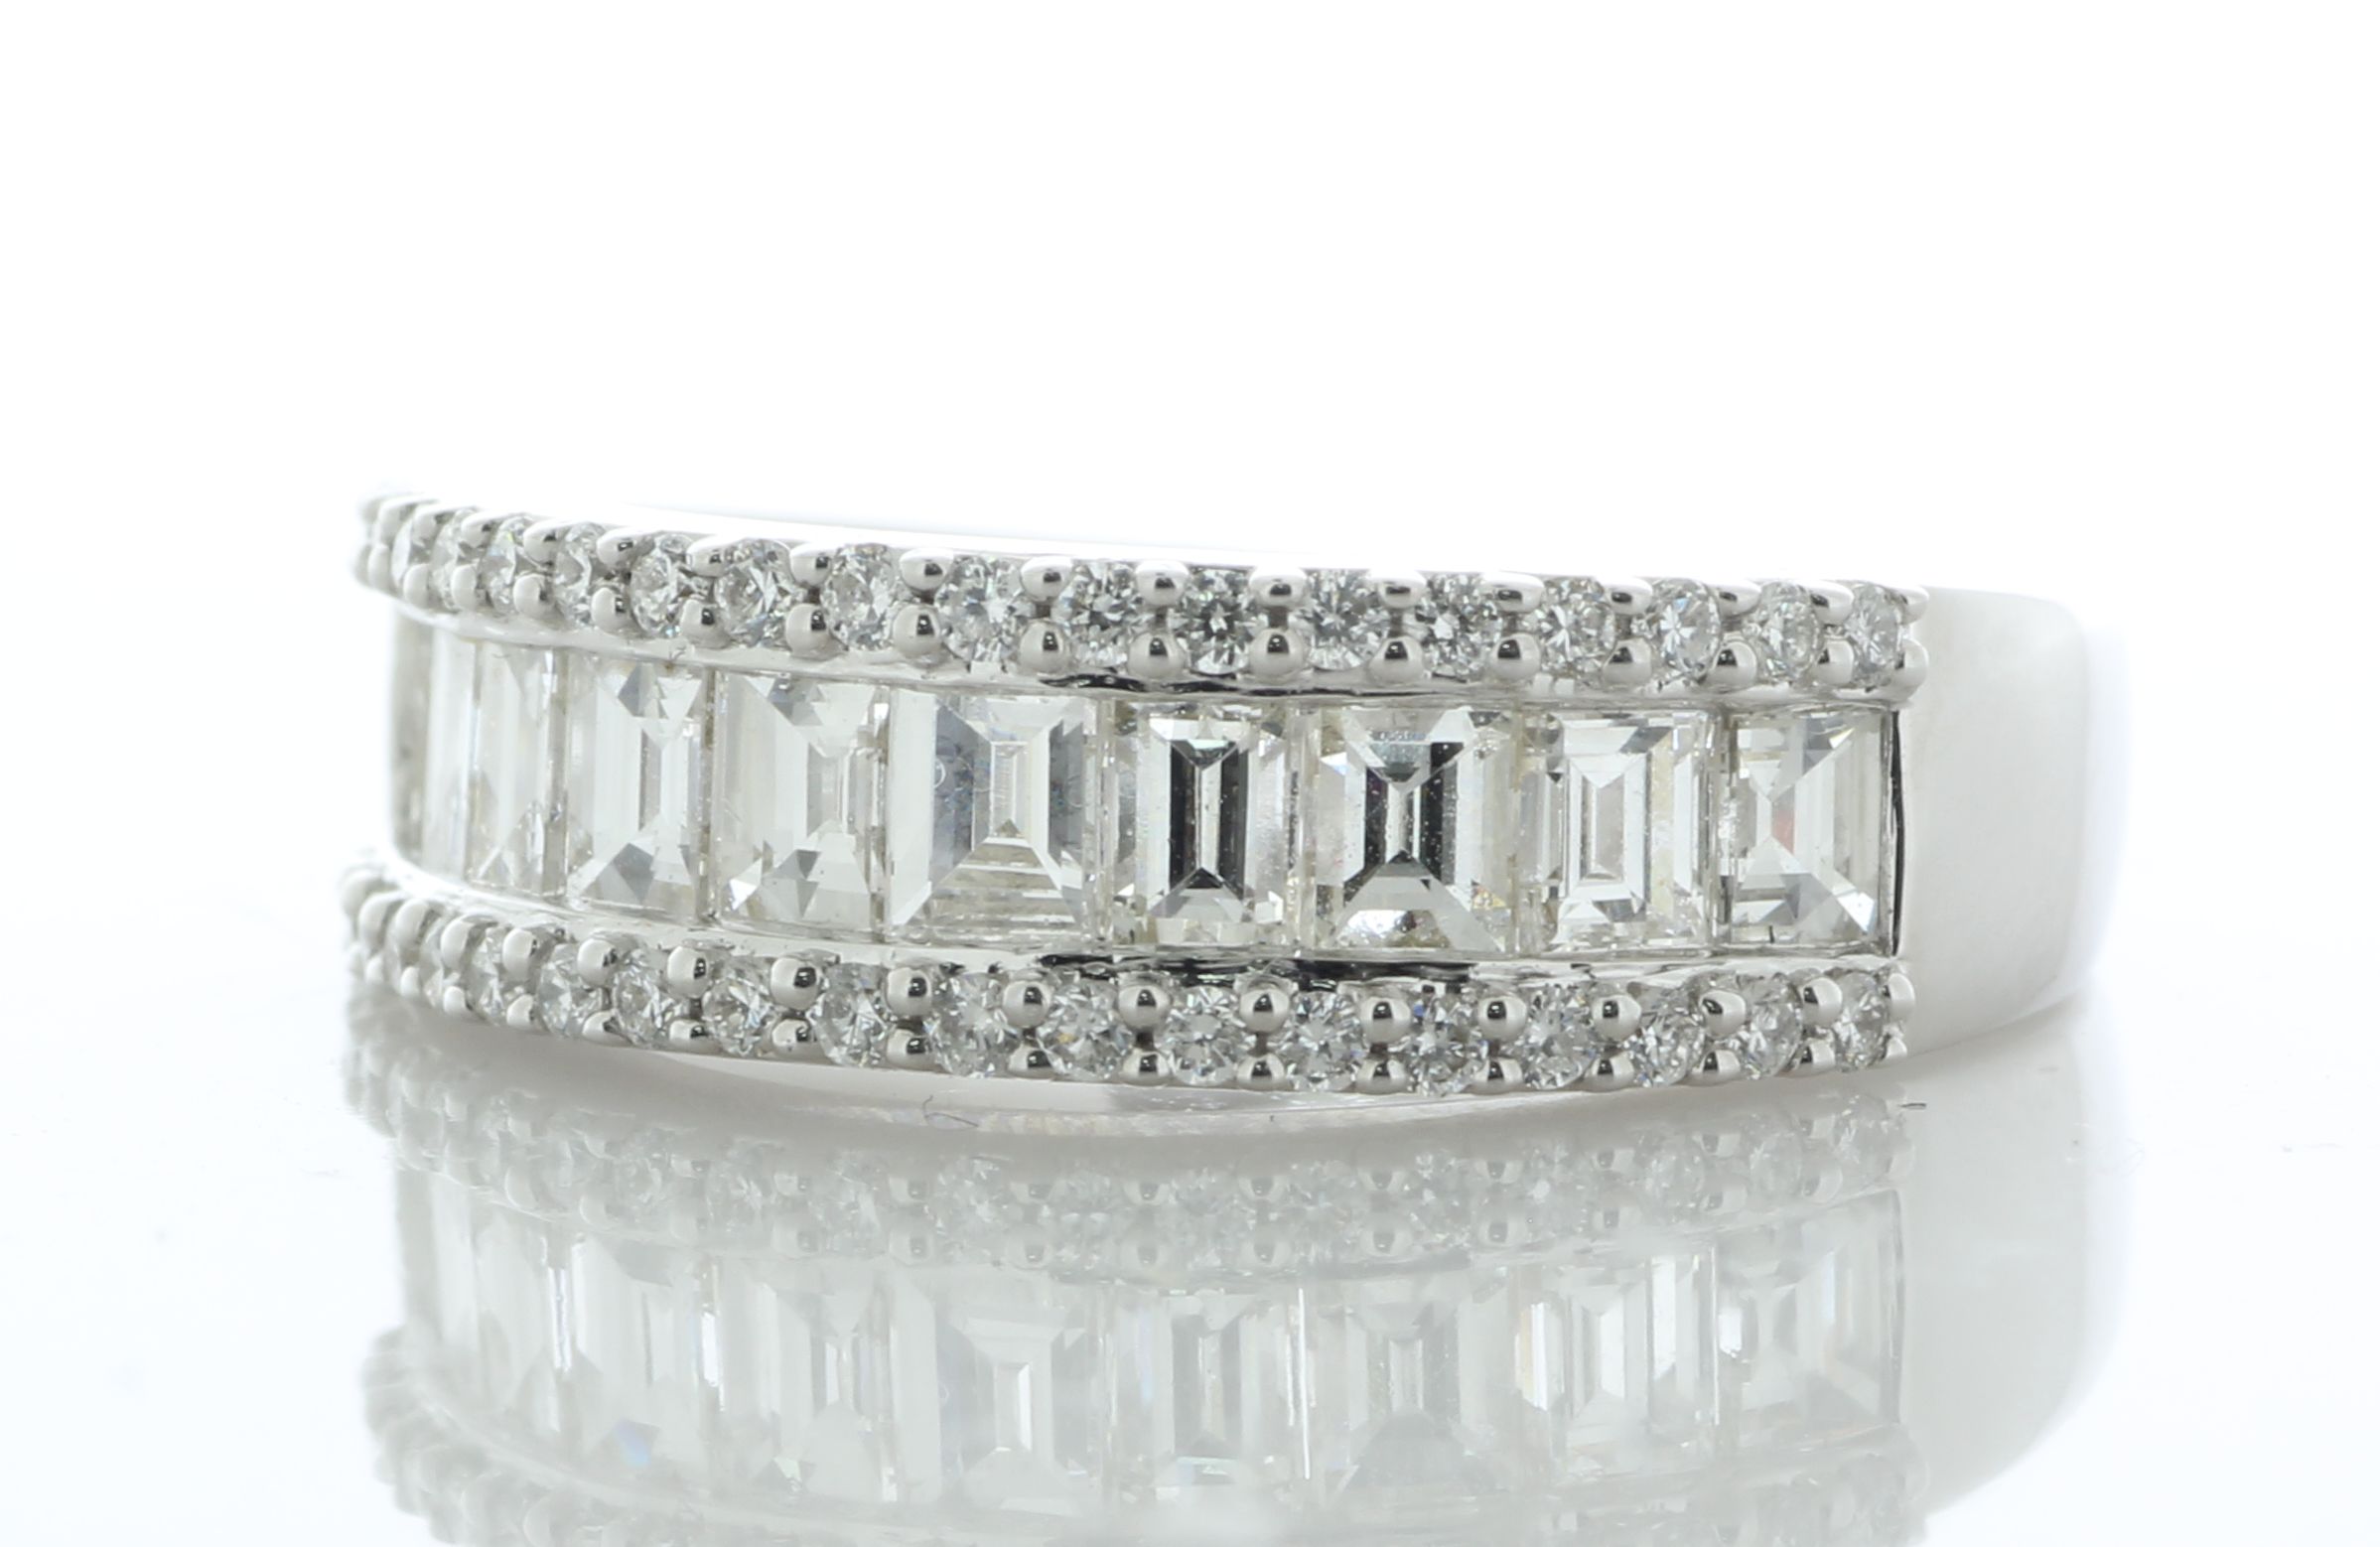 18ct White Gold Channel Set Semi Eternity Diamond Ring 1.37 Carats - Image 2 of 5